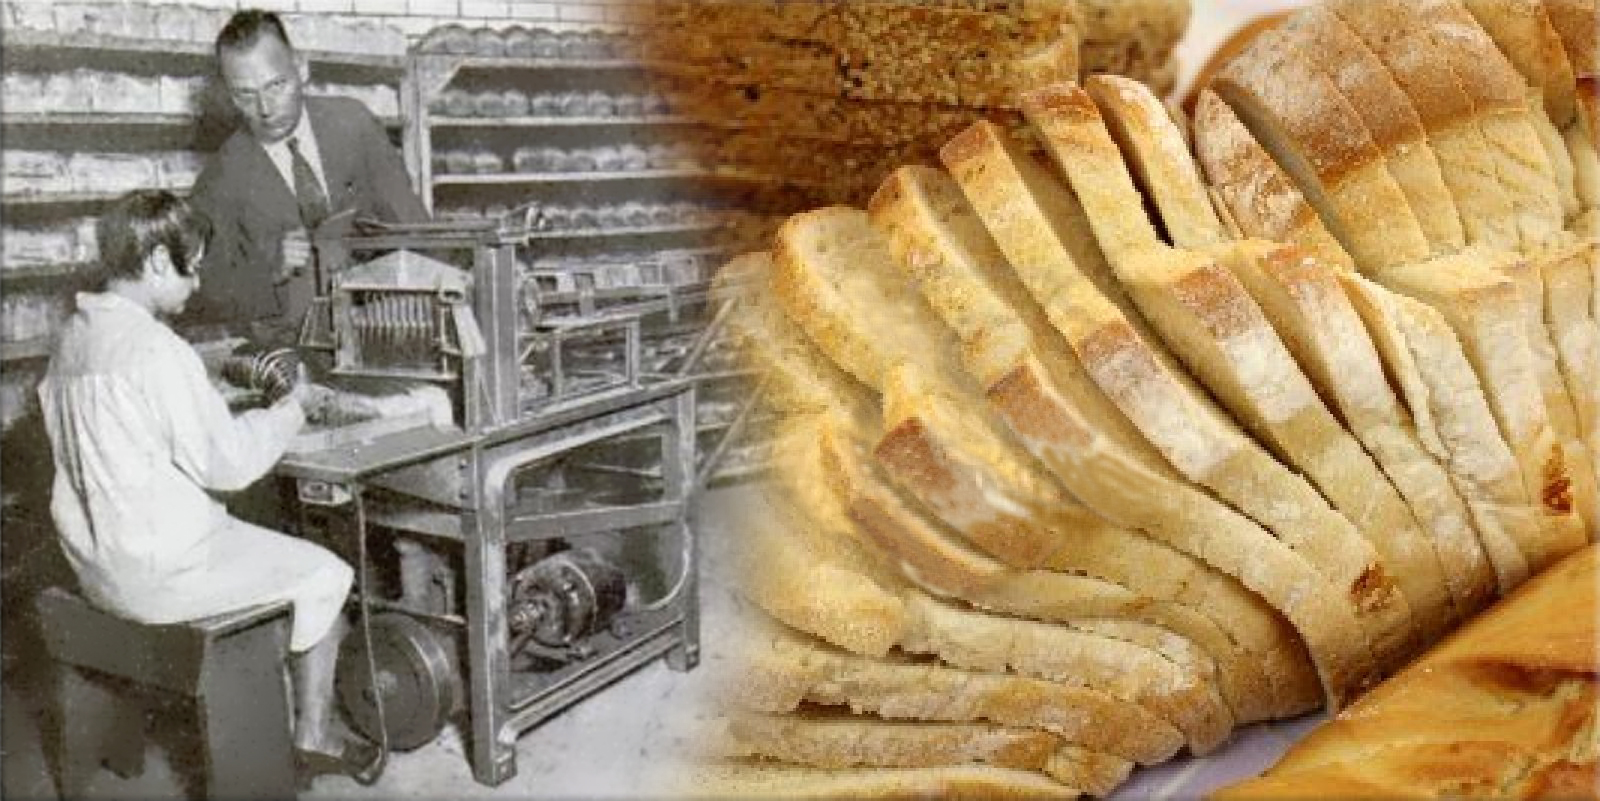 Sliced bread is sold for the first time by the Chillicothe Baking Company of Chillicothe, Missouri